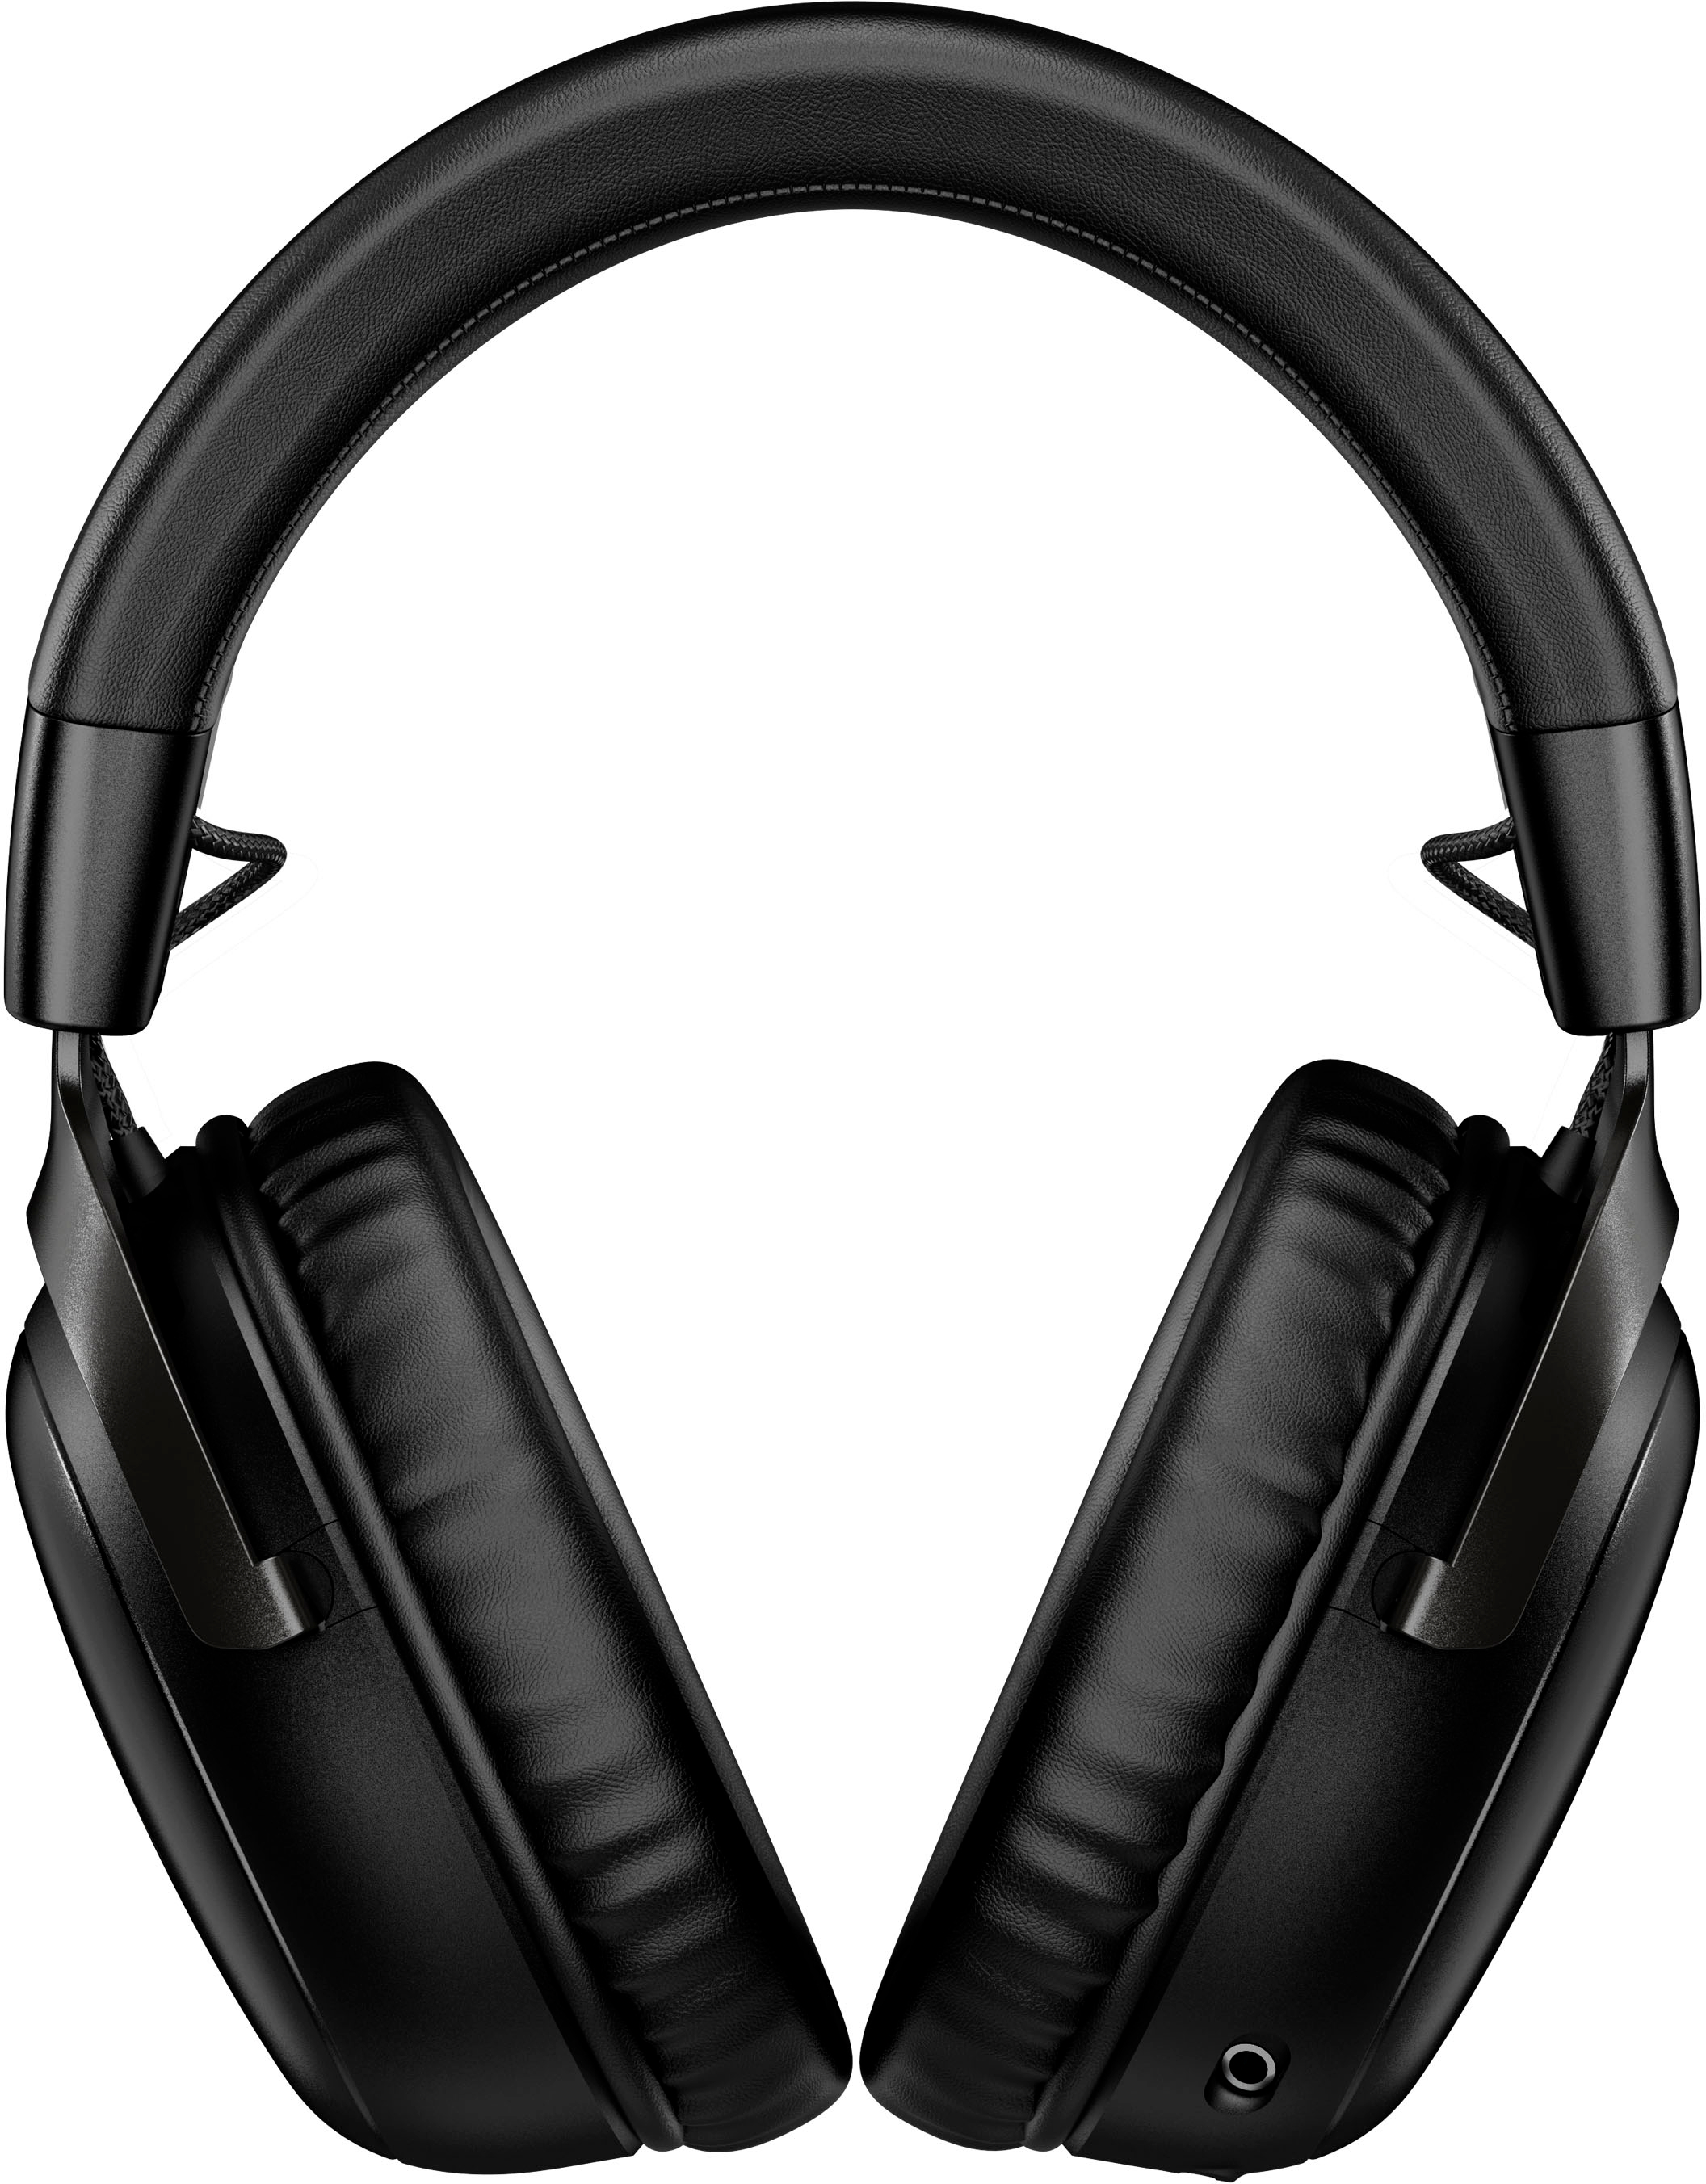 HyperX Cloud Flight – Wireless Gaming Headset for PS5 and PS4, Up to  30-hour battery, Memory foam ear cushions and premium leatherette